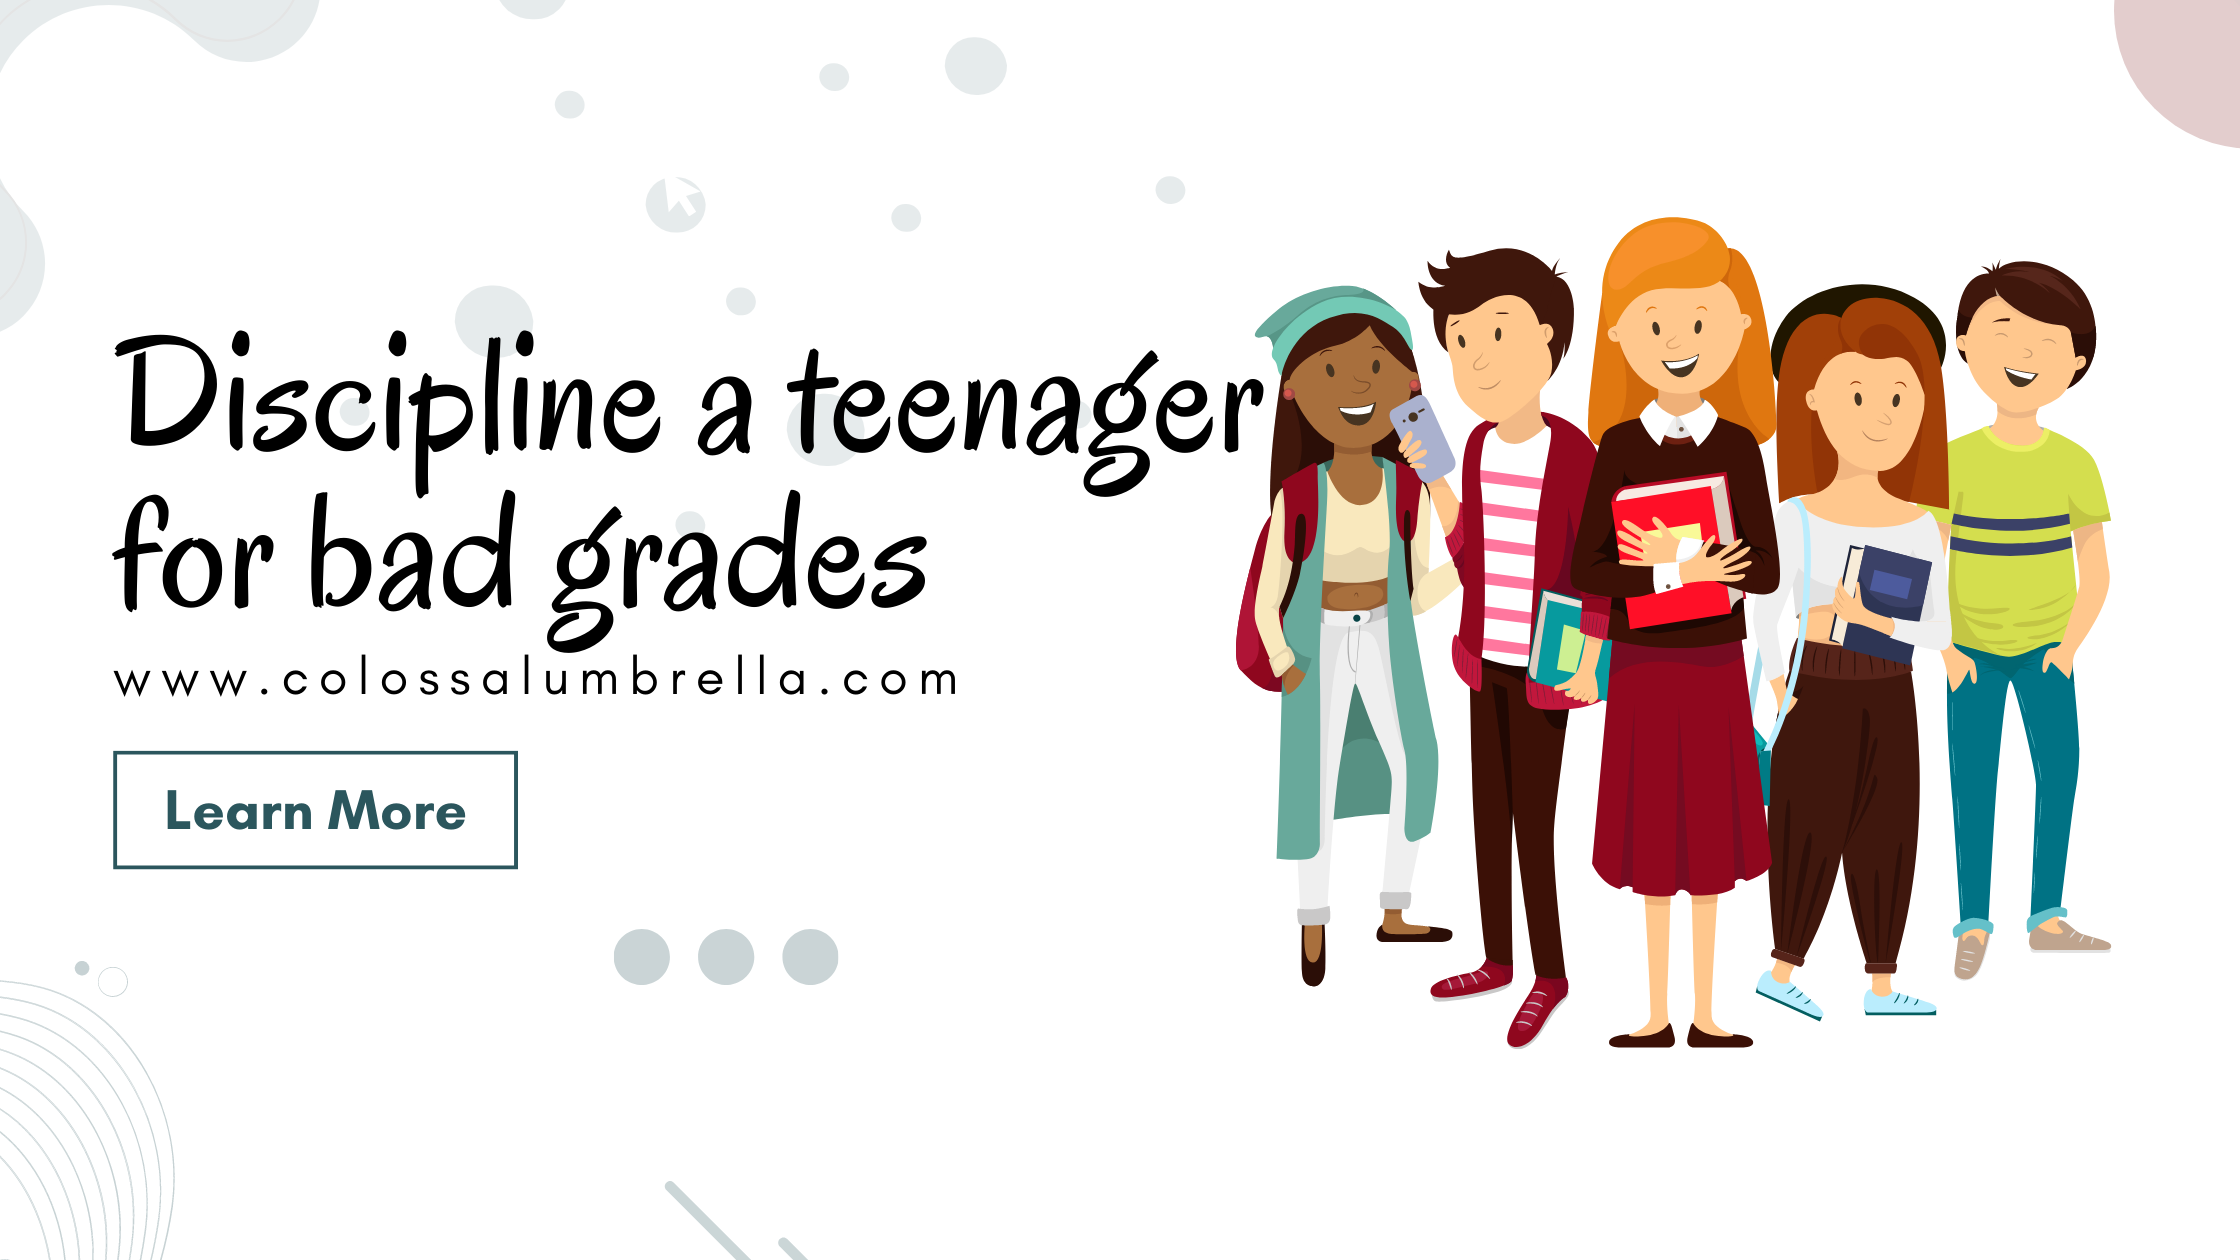 7 Effortless ways on how to discipline a teenager for bad grades